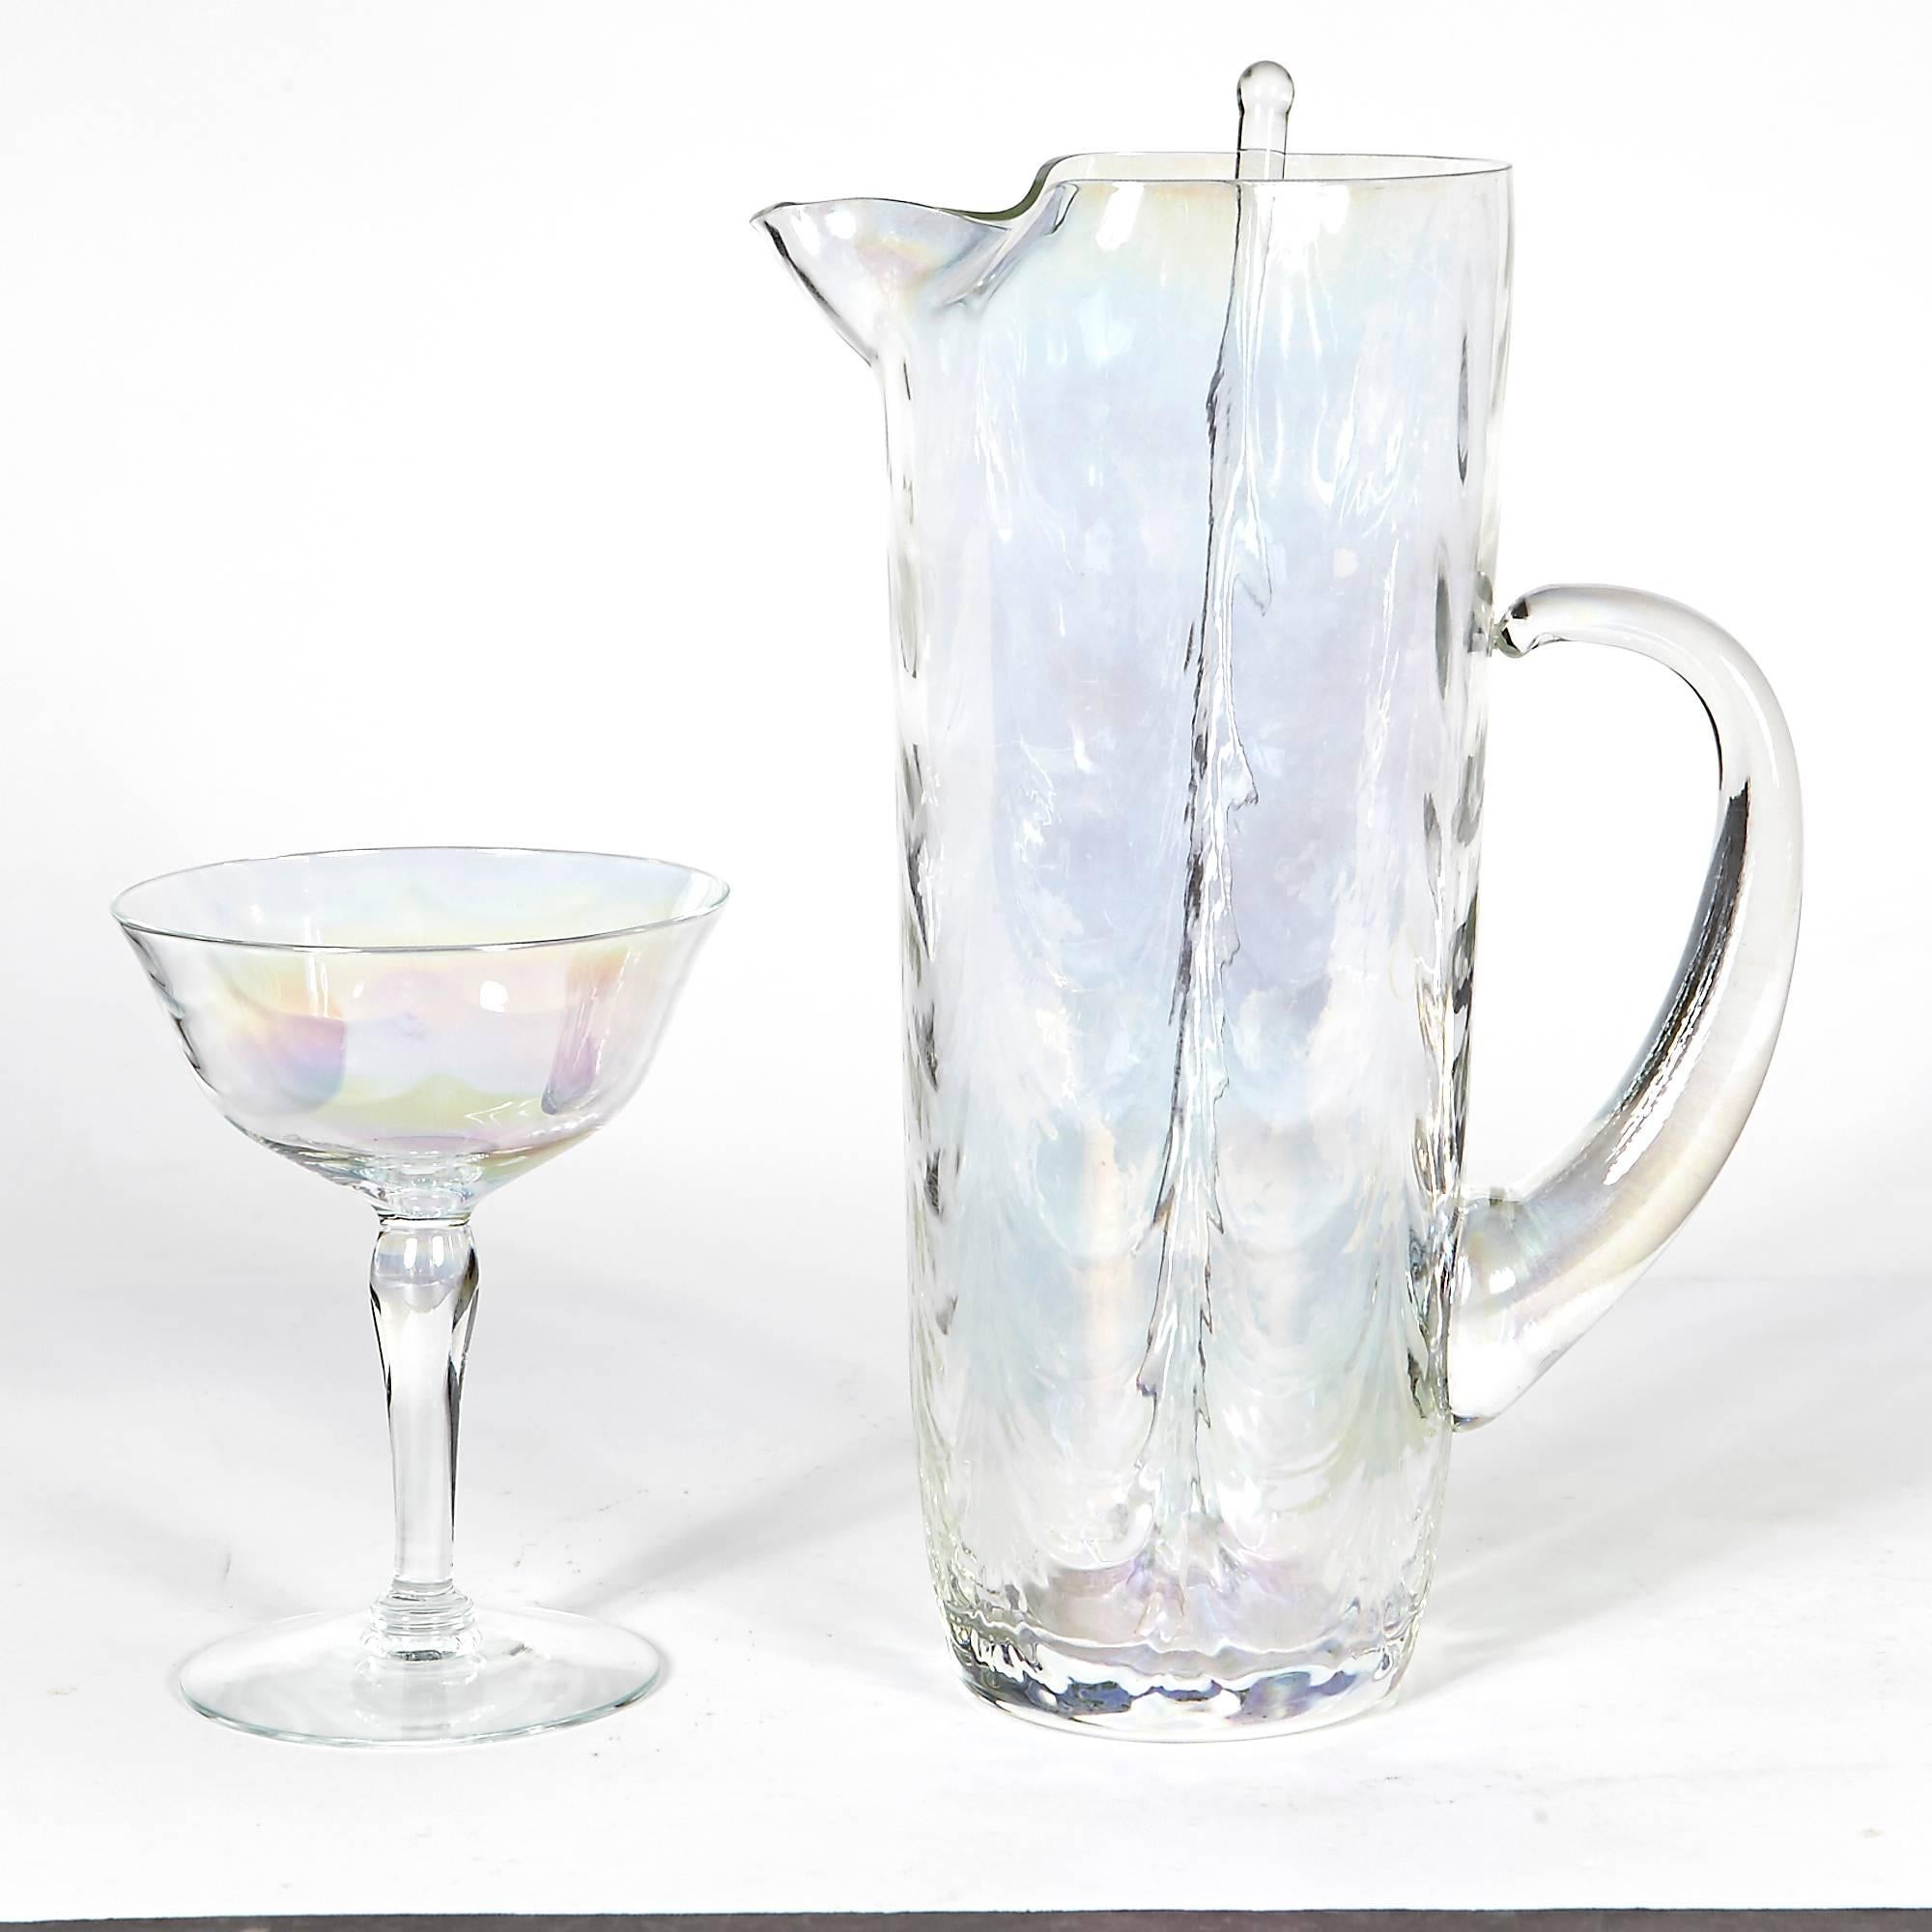 1950s Iridescent Glass Beverage Entertainment Set of 32 Pieces For Sale 2